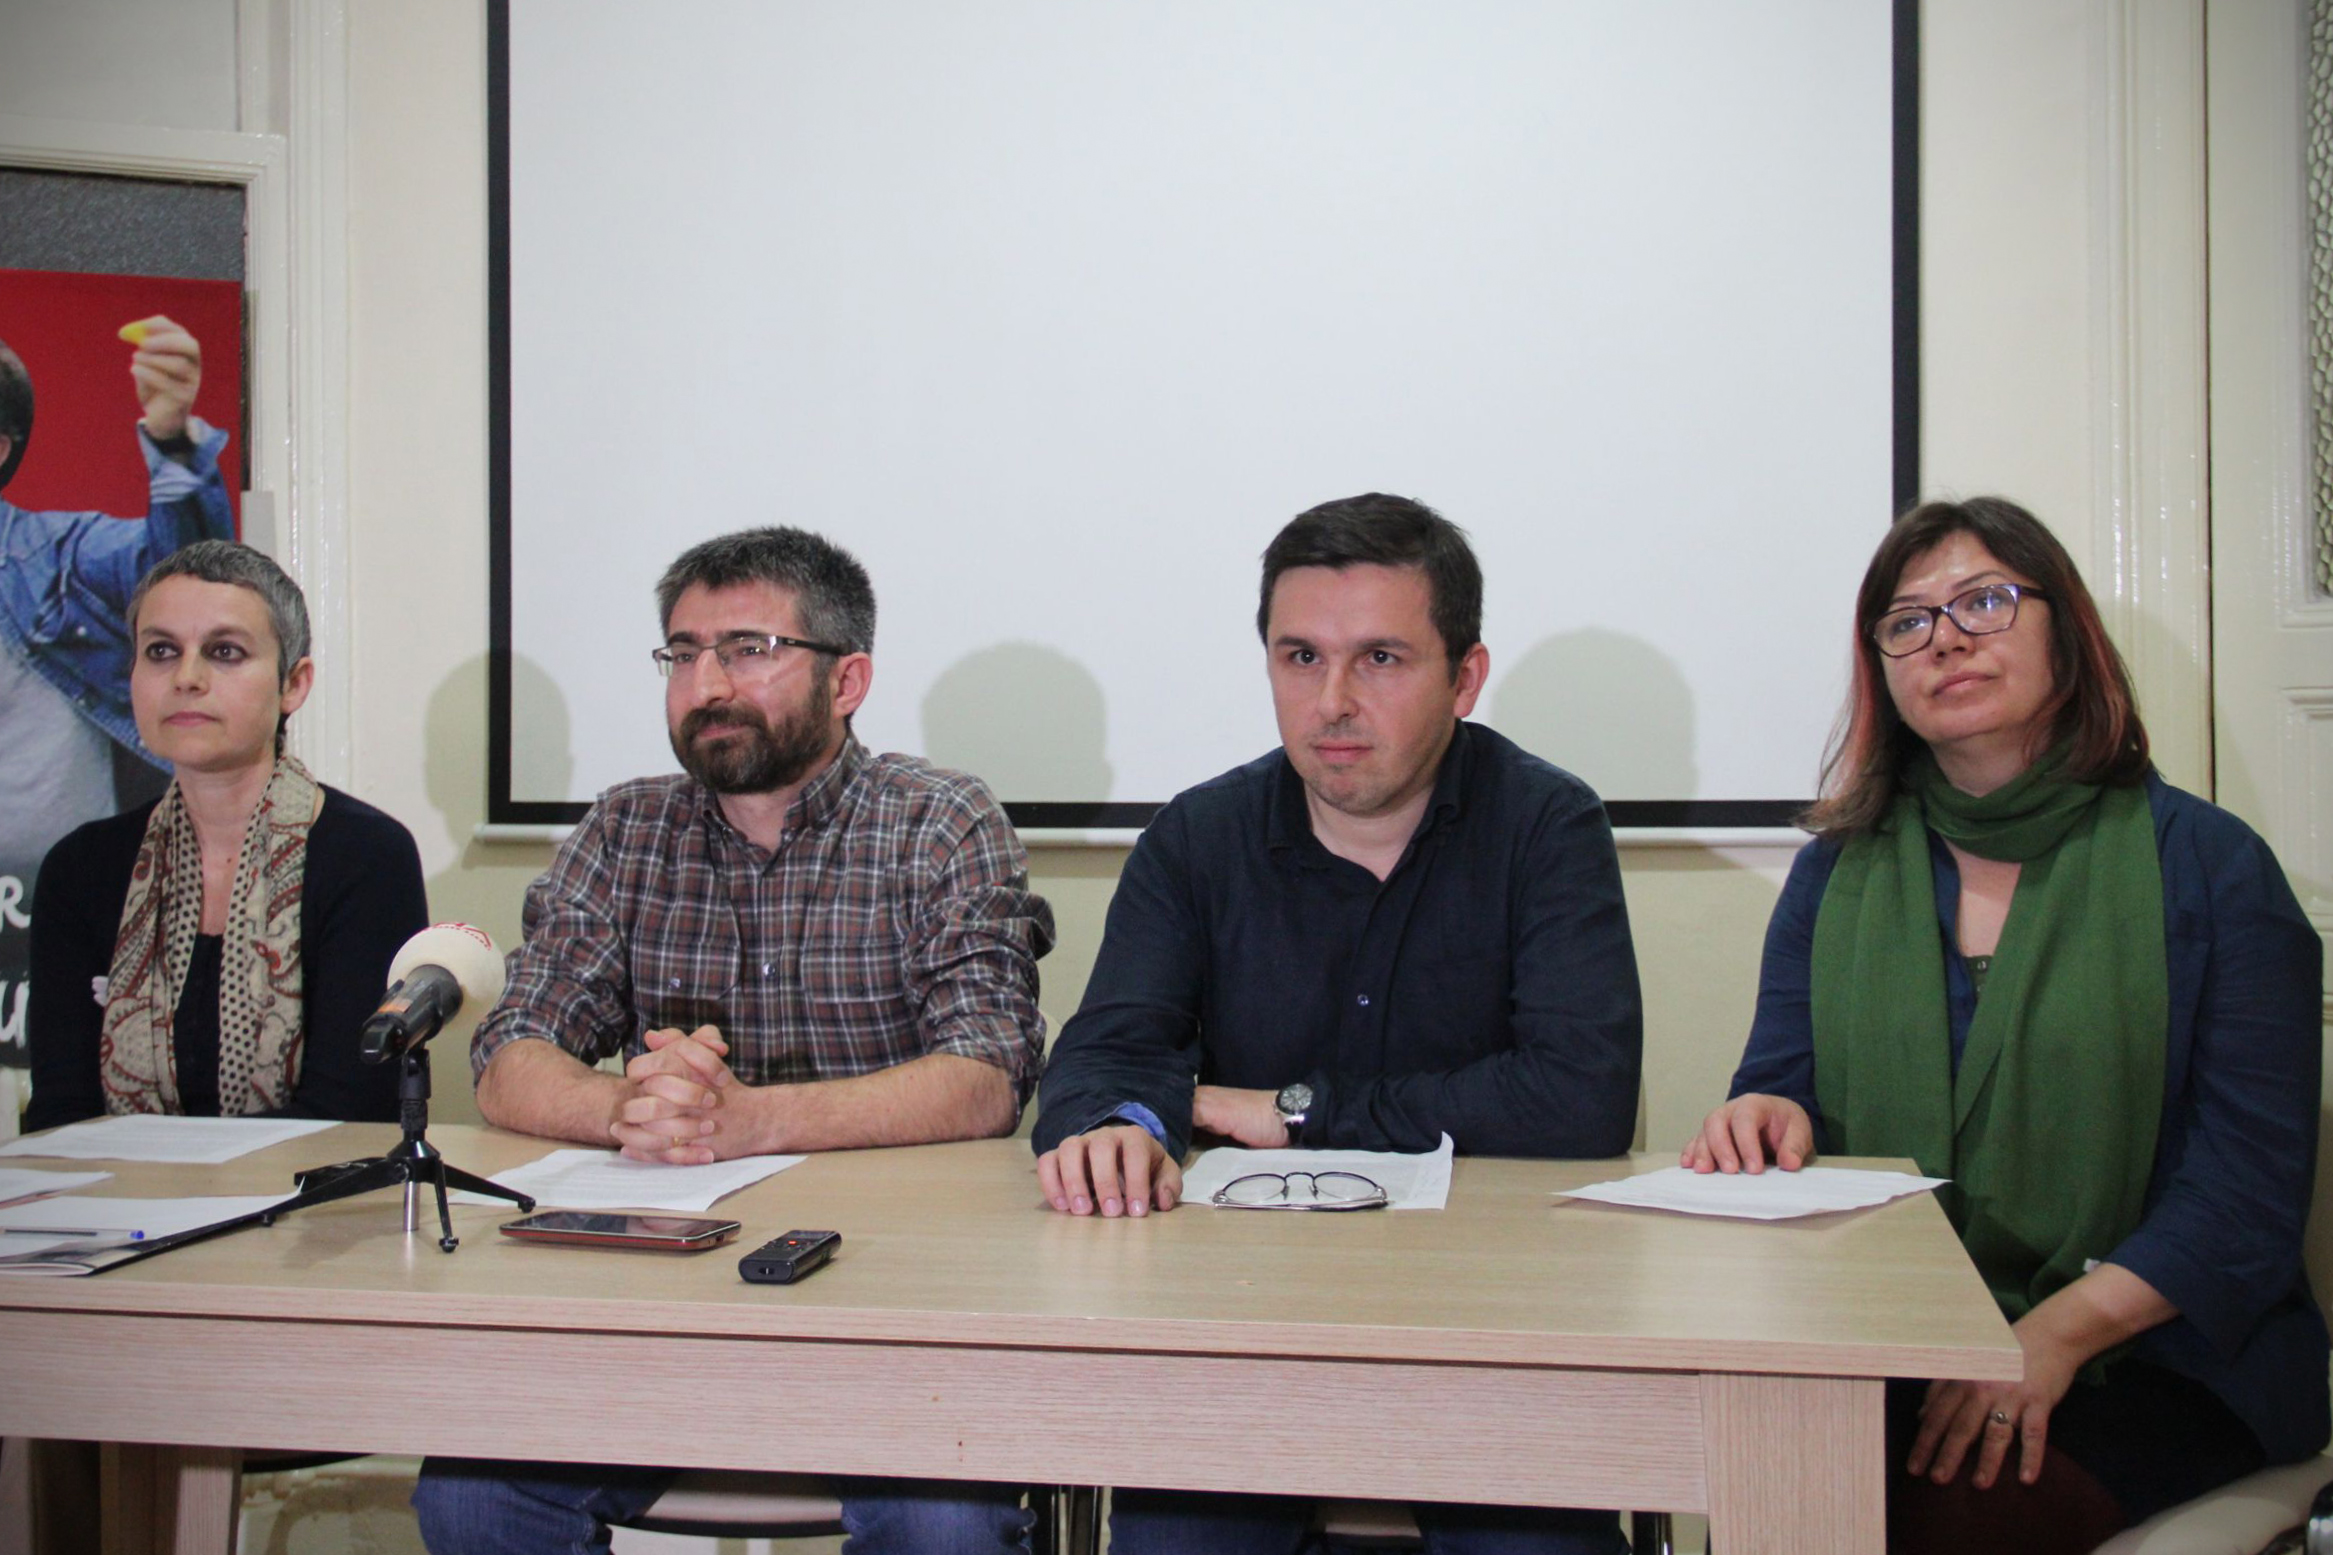 Esra Mungan, Muzaffer Kaya, Kıvanç Ersoy and Meral Camcı are academics currently held in pre-trial detention in Istanbul after they held a press conference on 10 March 2016, reiterating their support for a statement they had signed in January. The appeal for peace criticizing ongoing curfews and security operations in south eastern Turkey and calling for a resumption of peace talks between Turkey and the armed Kurdistan Workers’ Party (PKK) initially attracted 1,128 academics across Turkey. A further 1,084 academics since signed to appeal, bringing the total to 2,212 signatories.